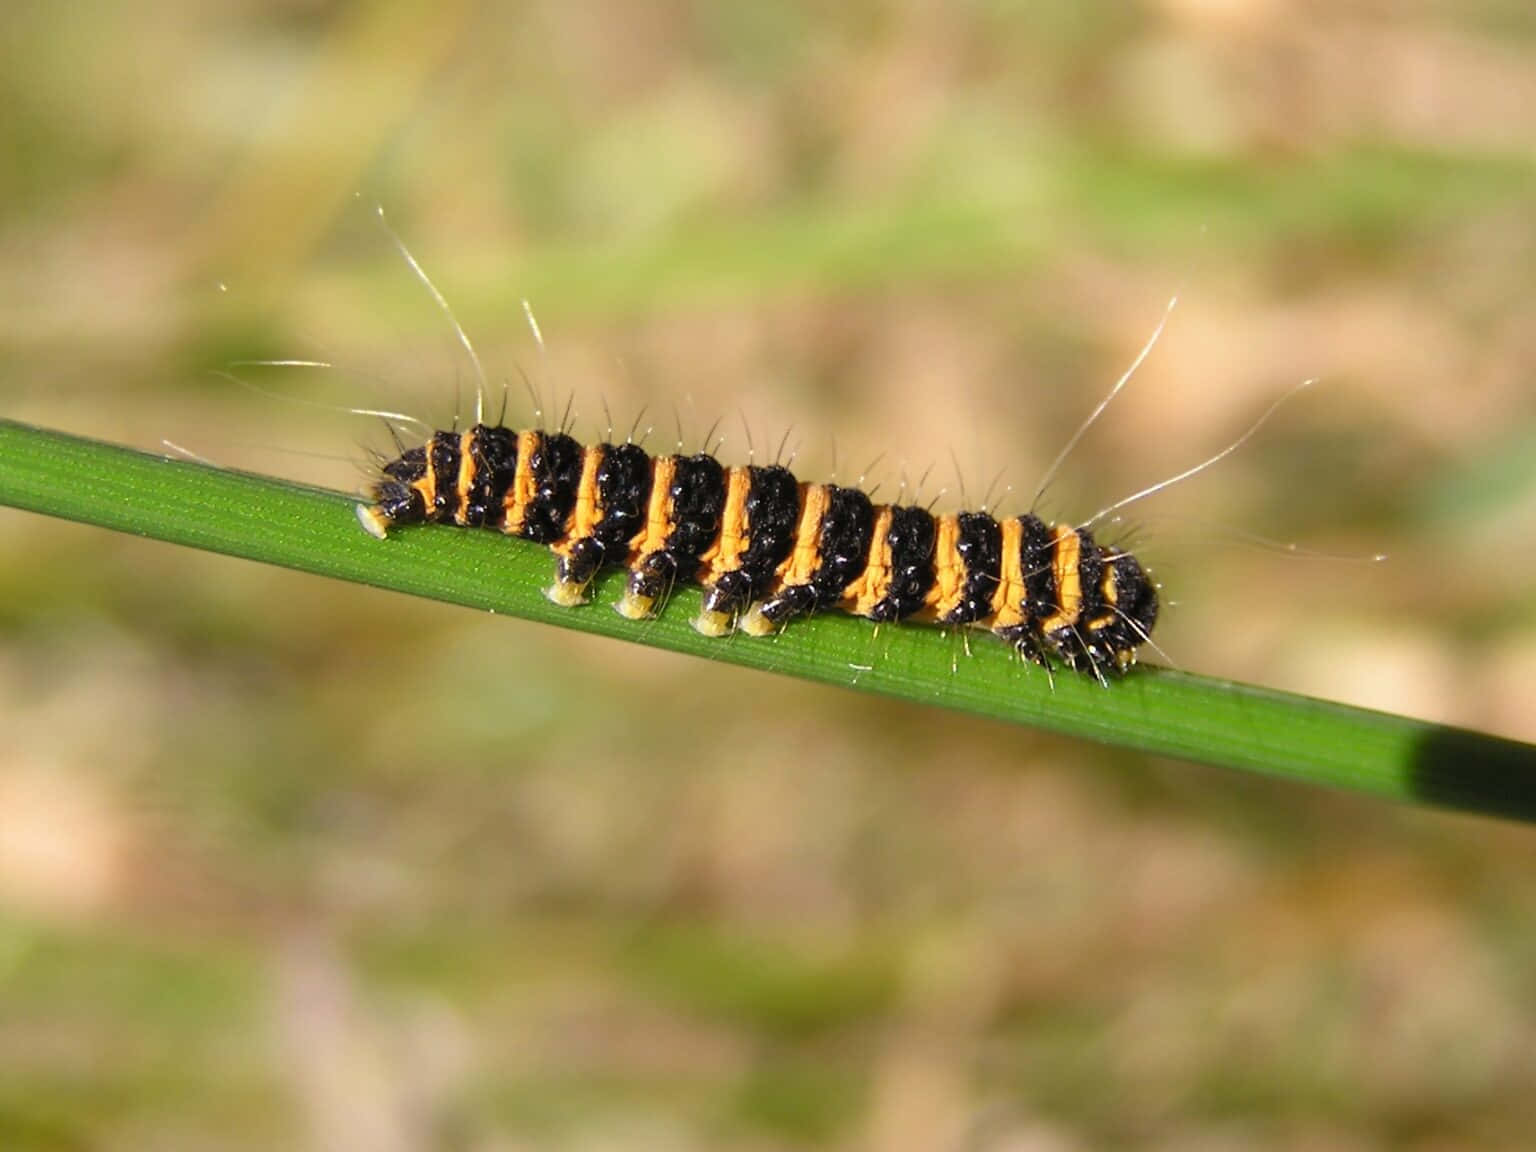 A Black And Yellow Caterpillar On A Stem